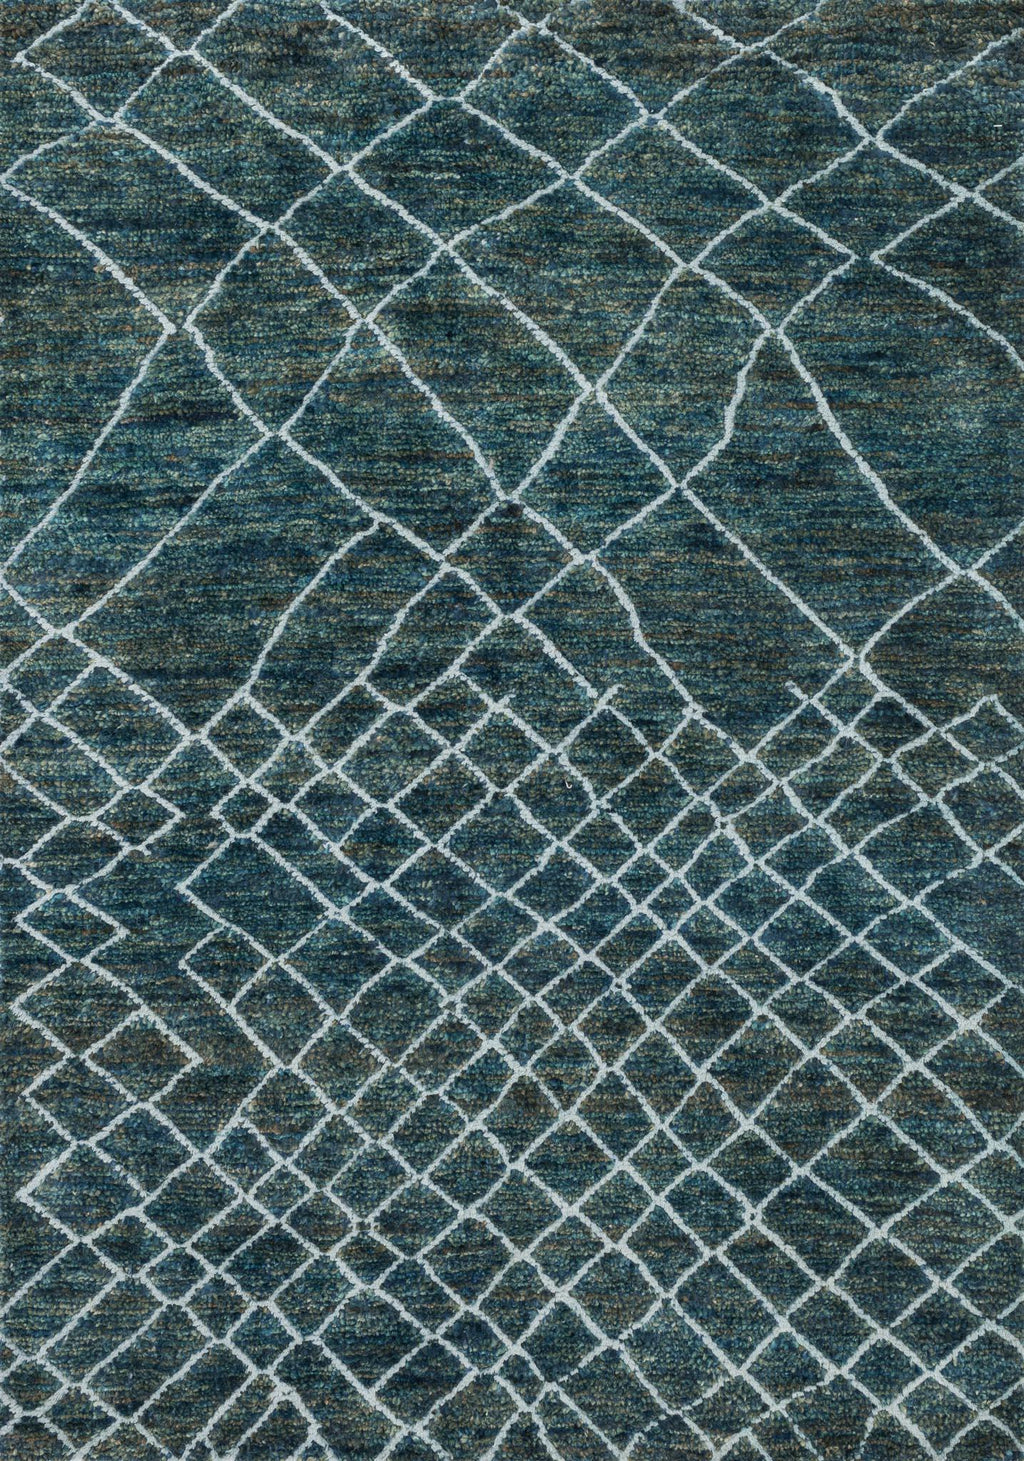 SAHARA Collection Rug  in  MEDITERRANEAN Blue Small Hand-Knotted Jute/Wool